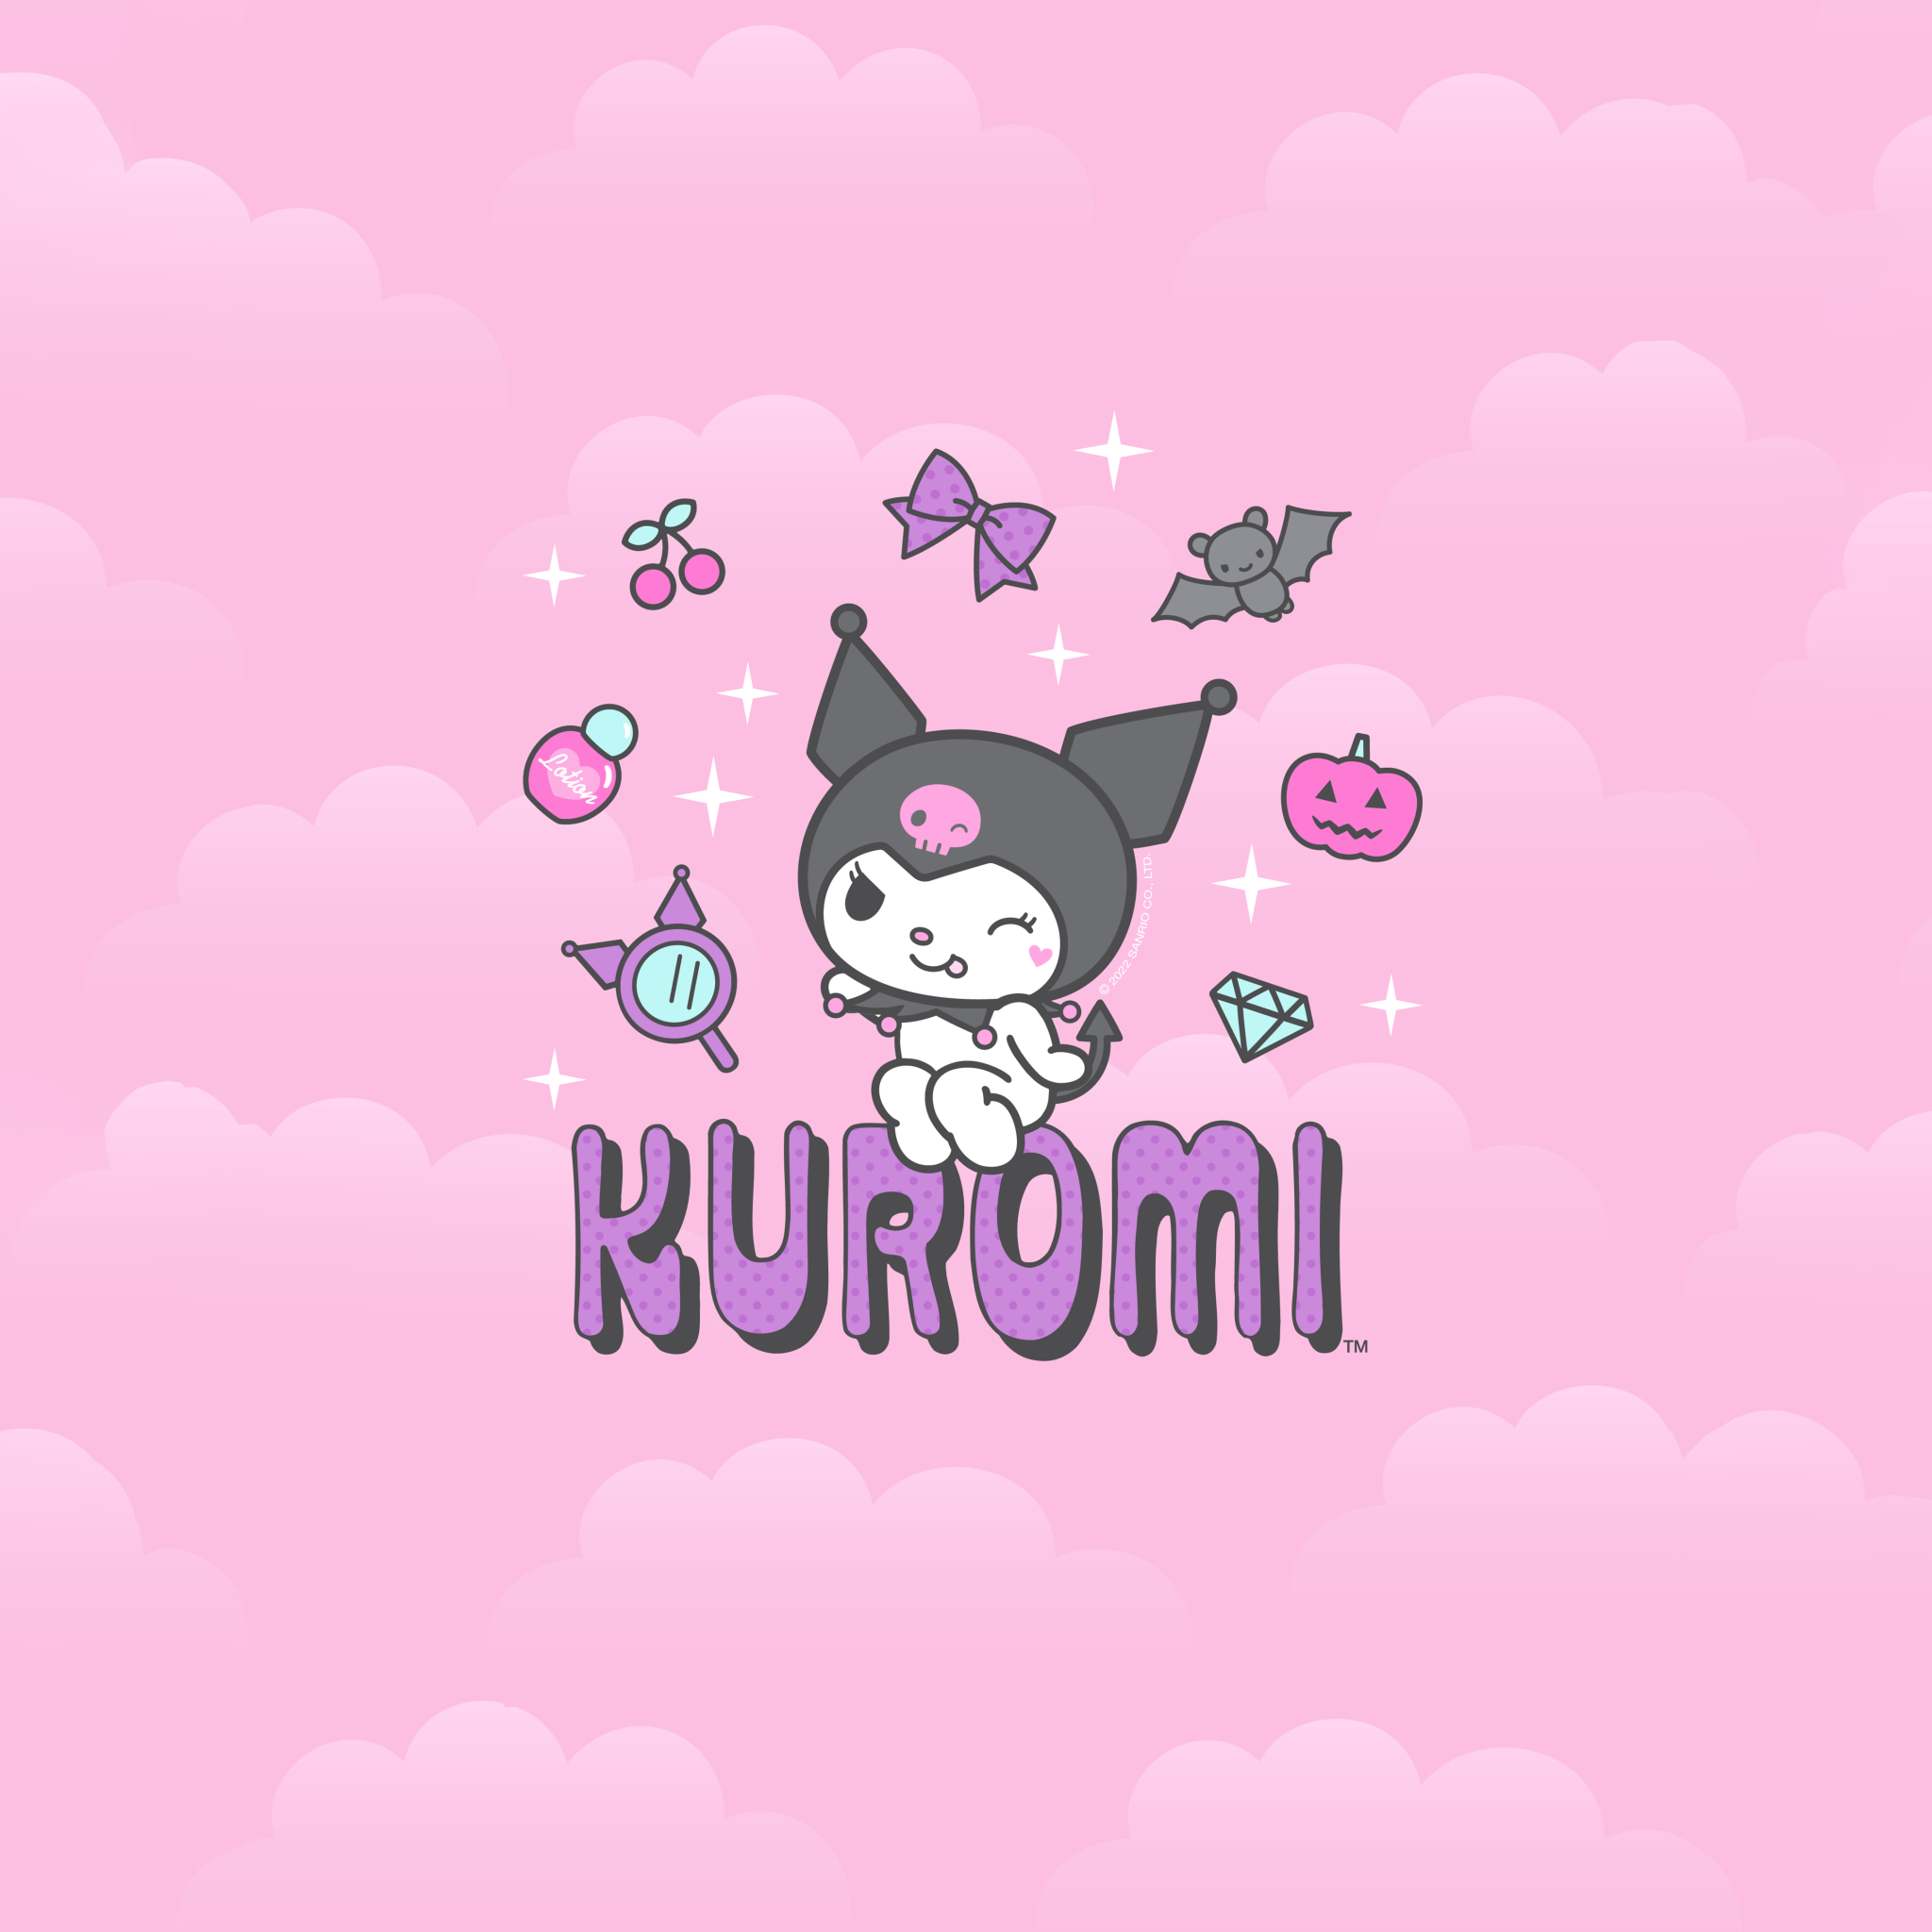 Kuromi is a character from the Japanese animation series 